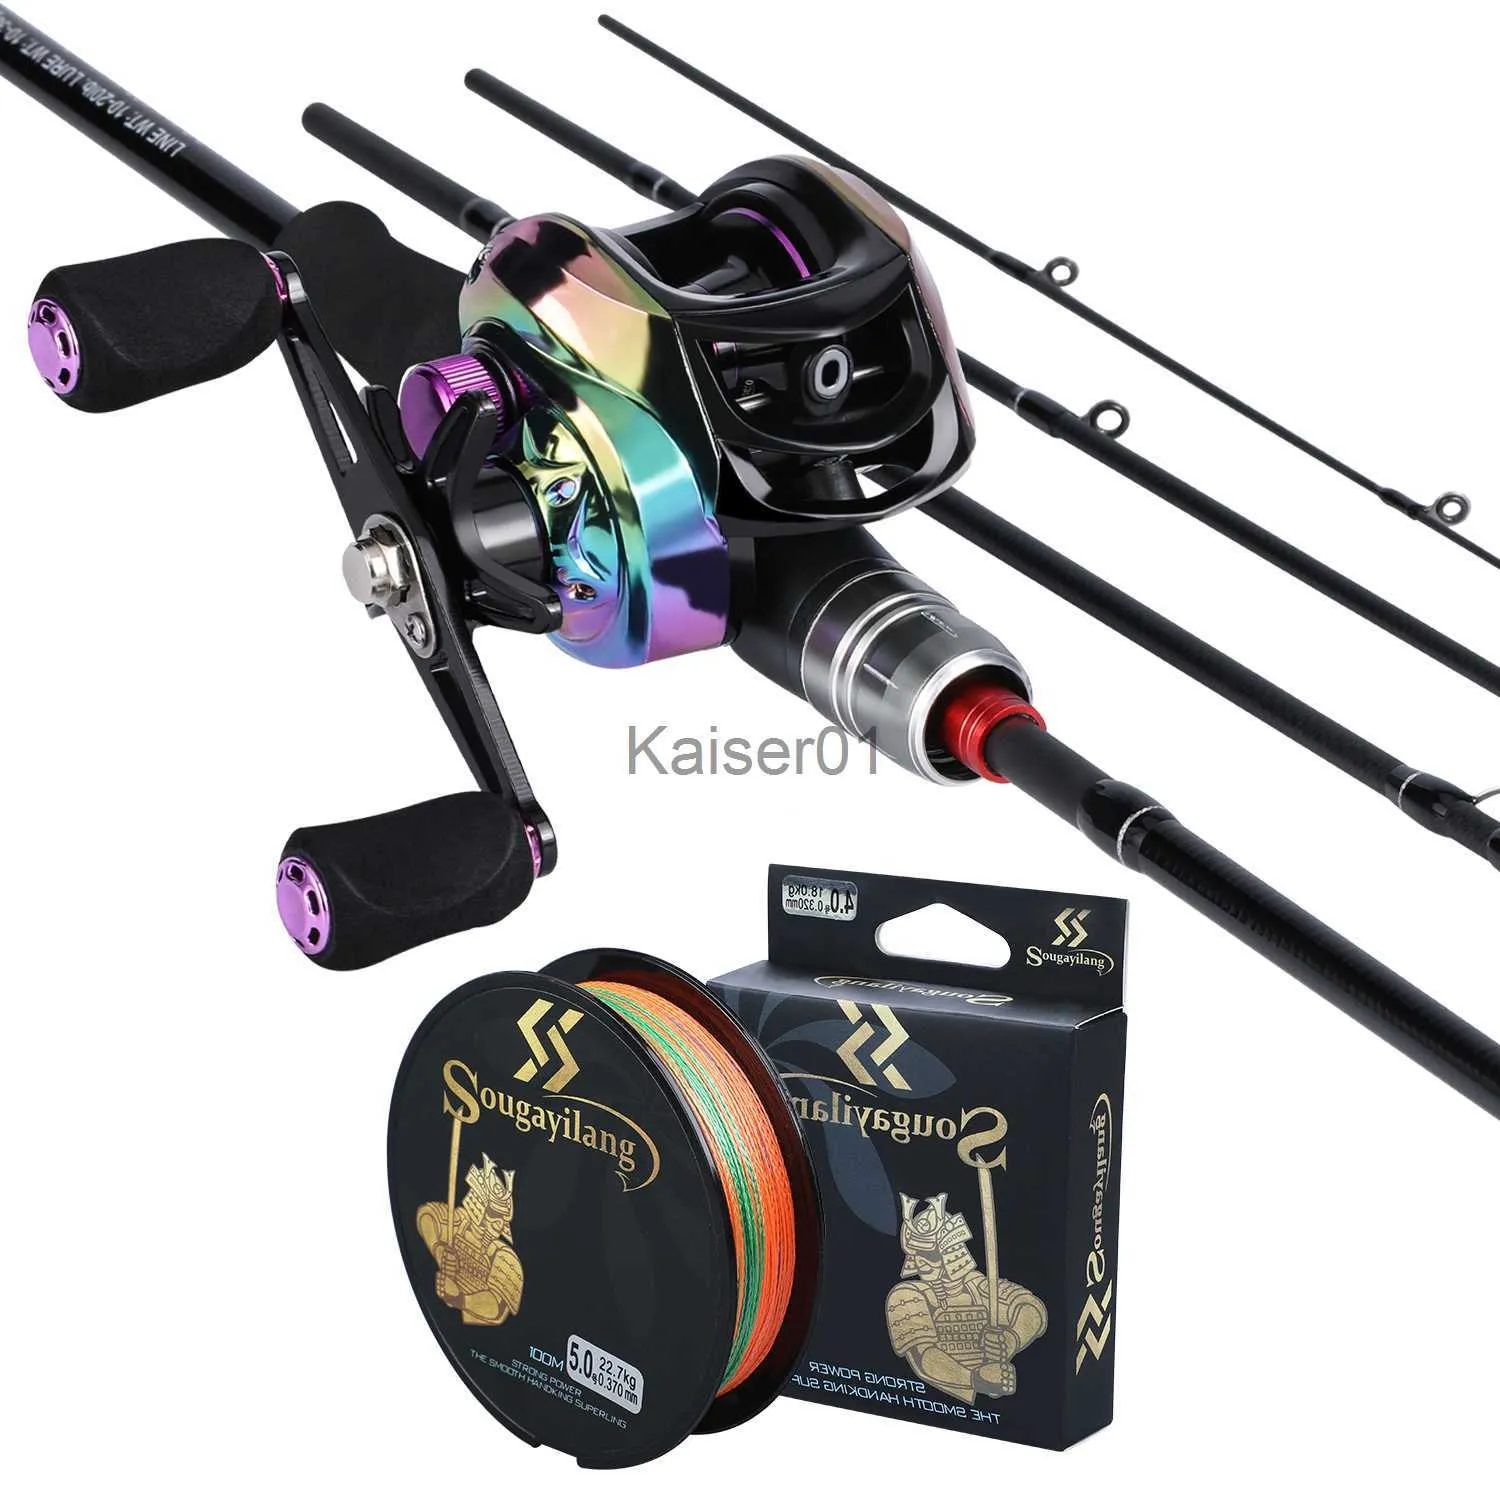 Sougayilang Fishing Combo 1.8m/2.1m Long Casting Spinning Reels And Reel  Set With Braided Fishing Line For Left And Right Hand Baitcasting X0901  From Kaiser01, $35.53